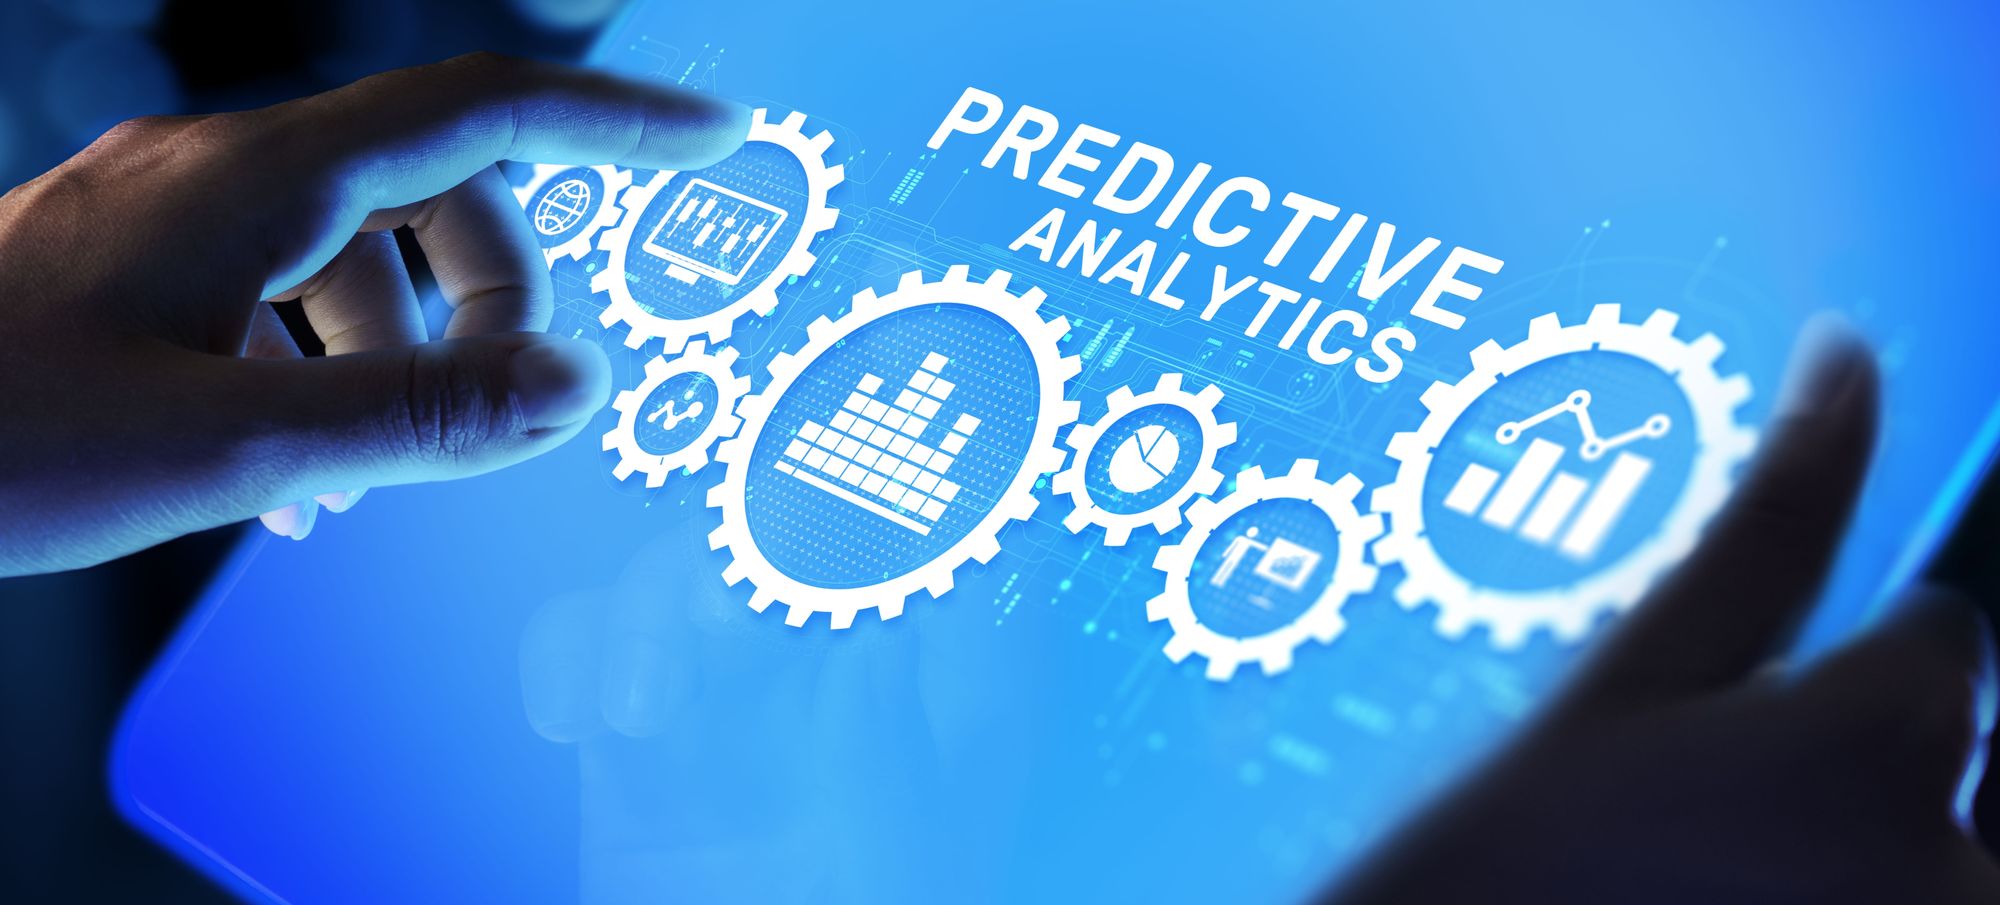 Predictive Analytics is an Important HR Recruitment Metric